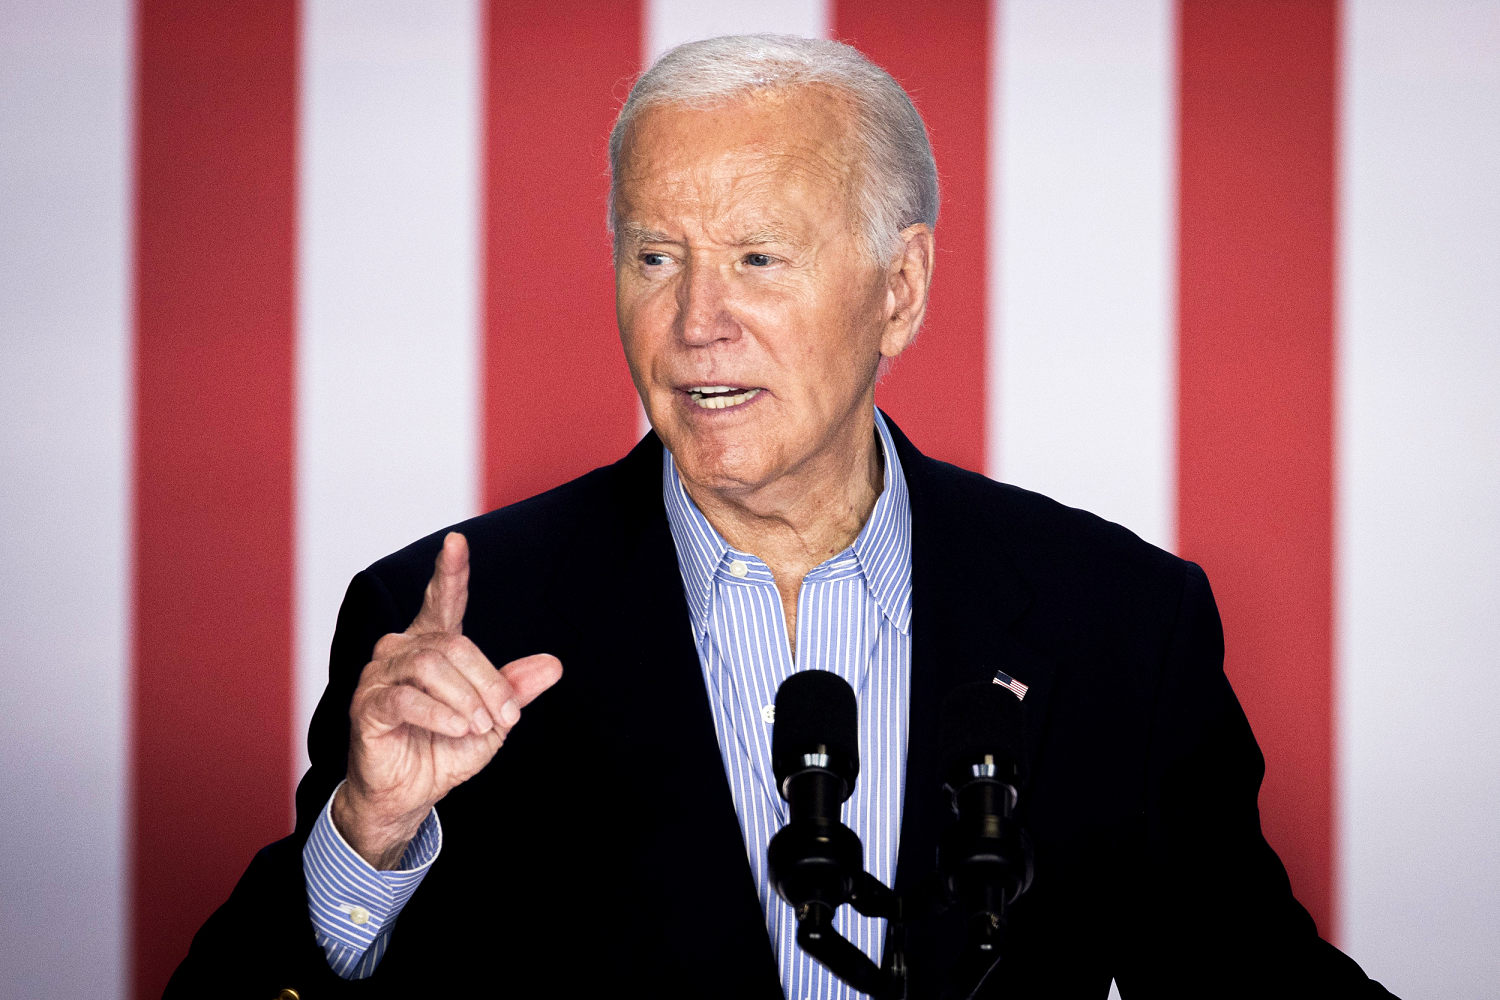 ‘We’re doomed’: Democratic lawmakers worry Biden’s interview won’t save his campaign